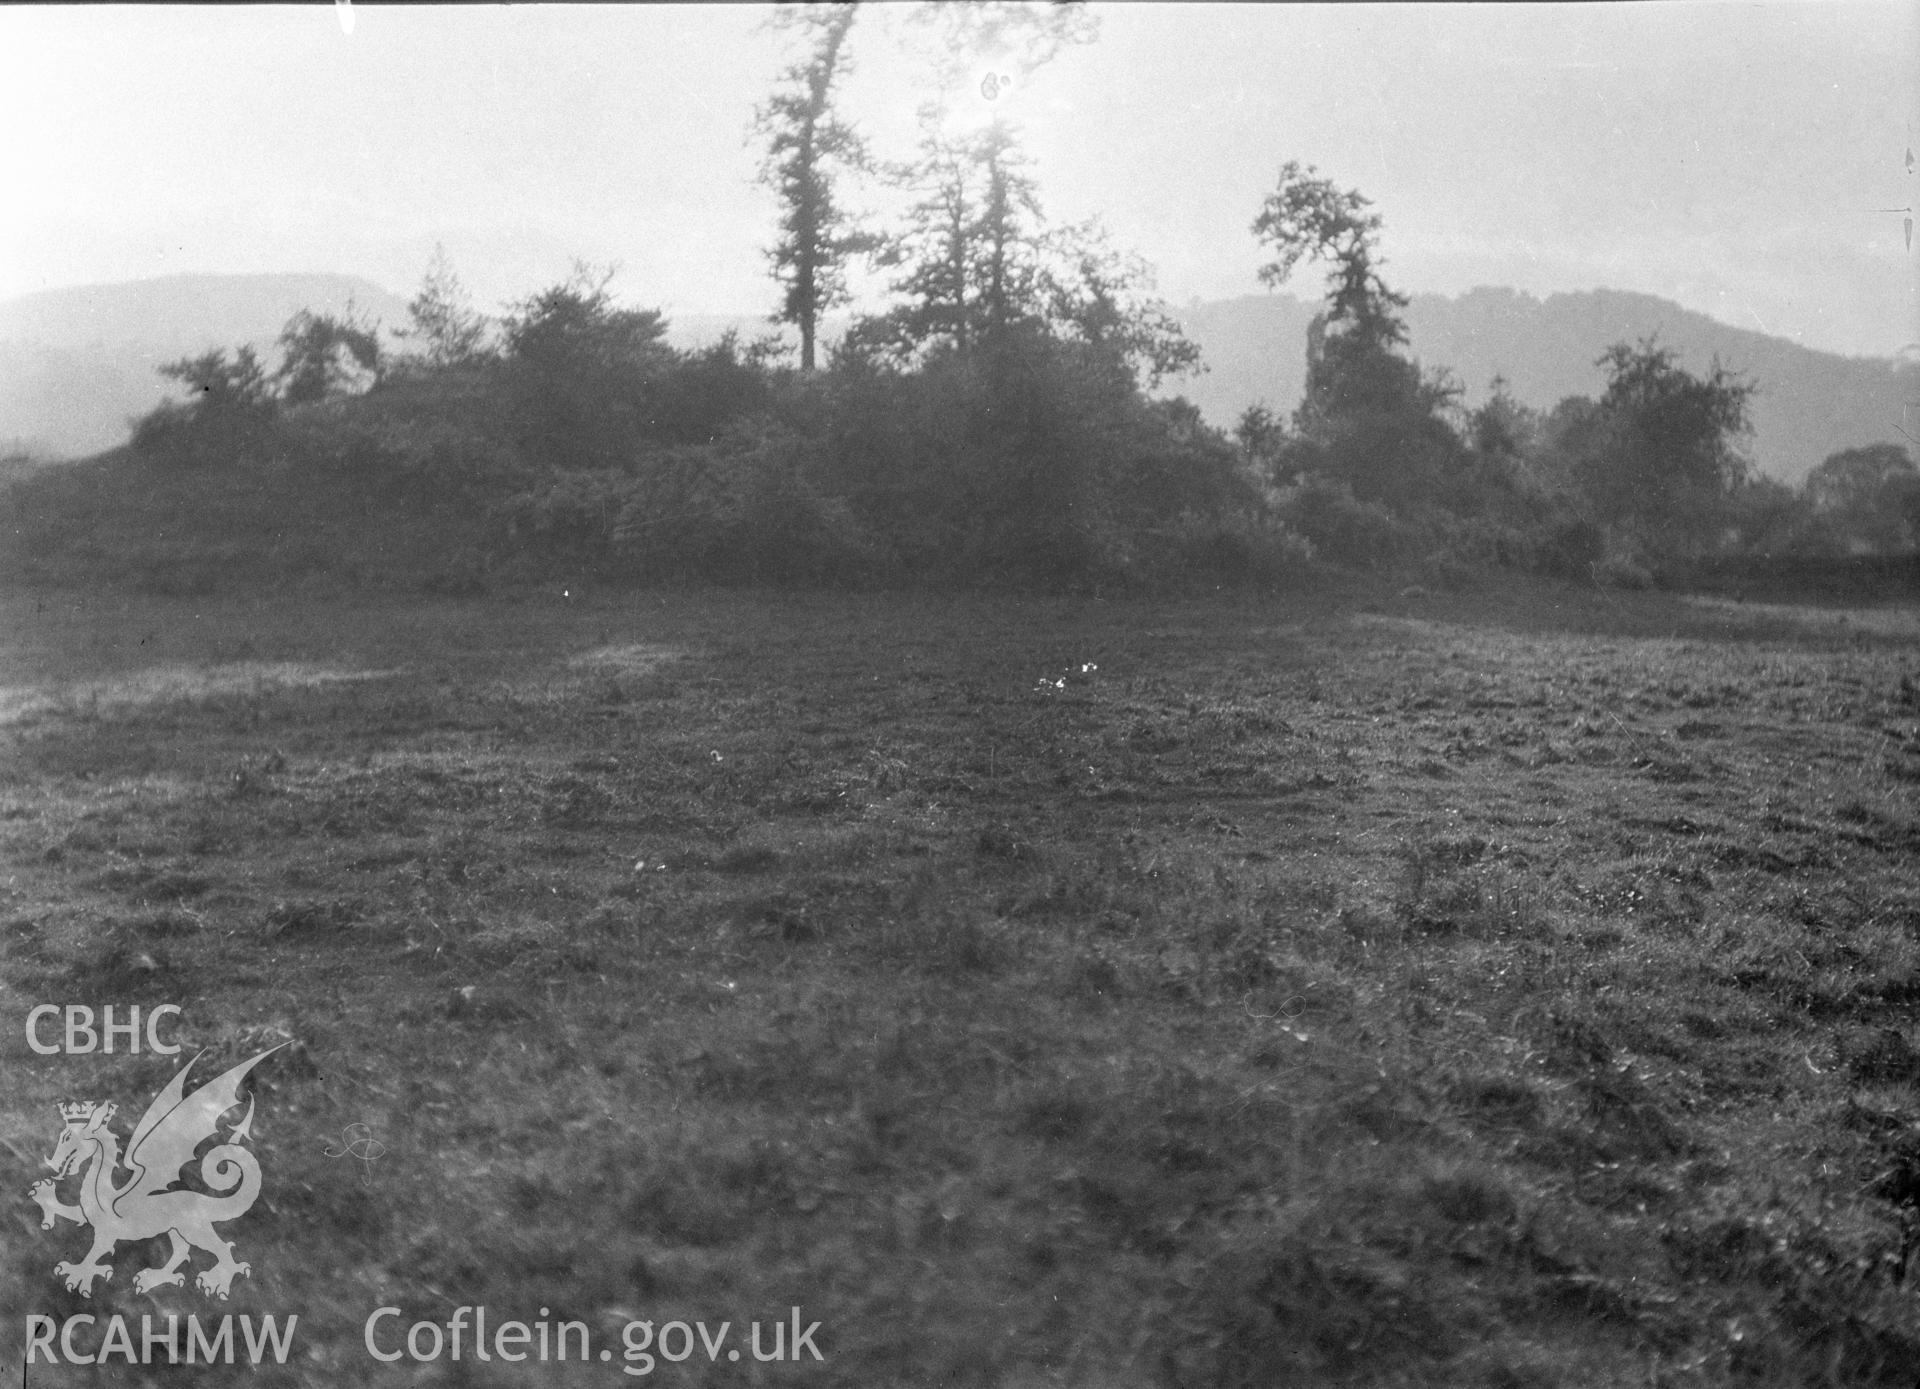 Digital copy of a nitrate negative showing Battle Tump, Llanelly. From the Cadw Monuments in Care Collection.